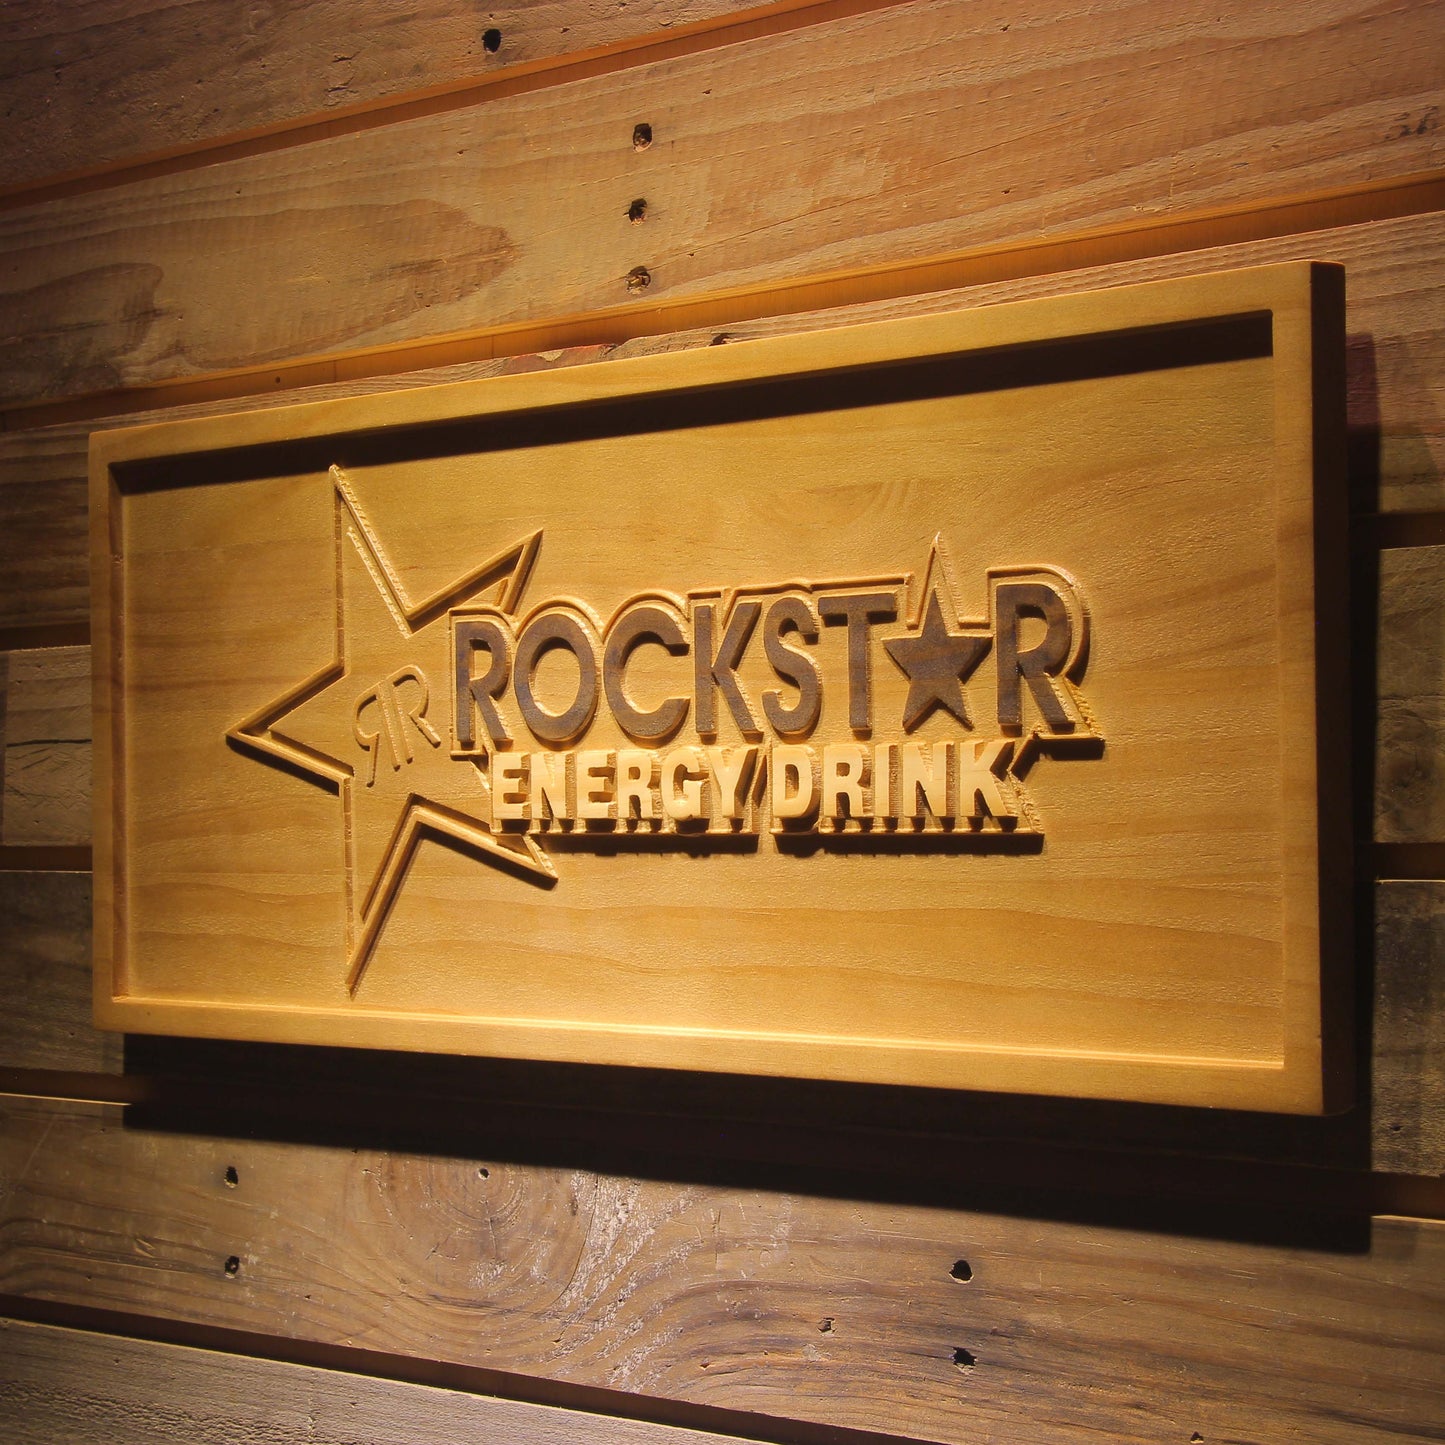 Rockstar Energy Drink Bar 3D Wooden Signs by Woody Signs Co. - Handmade Crafted Unique Wooden Creative